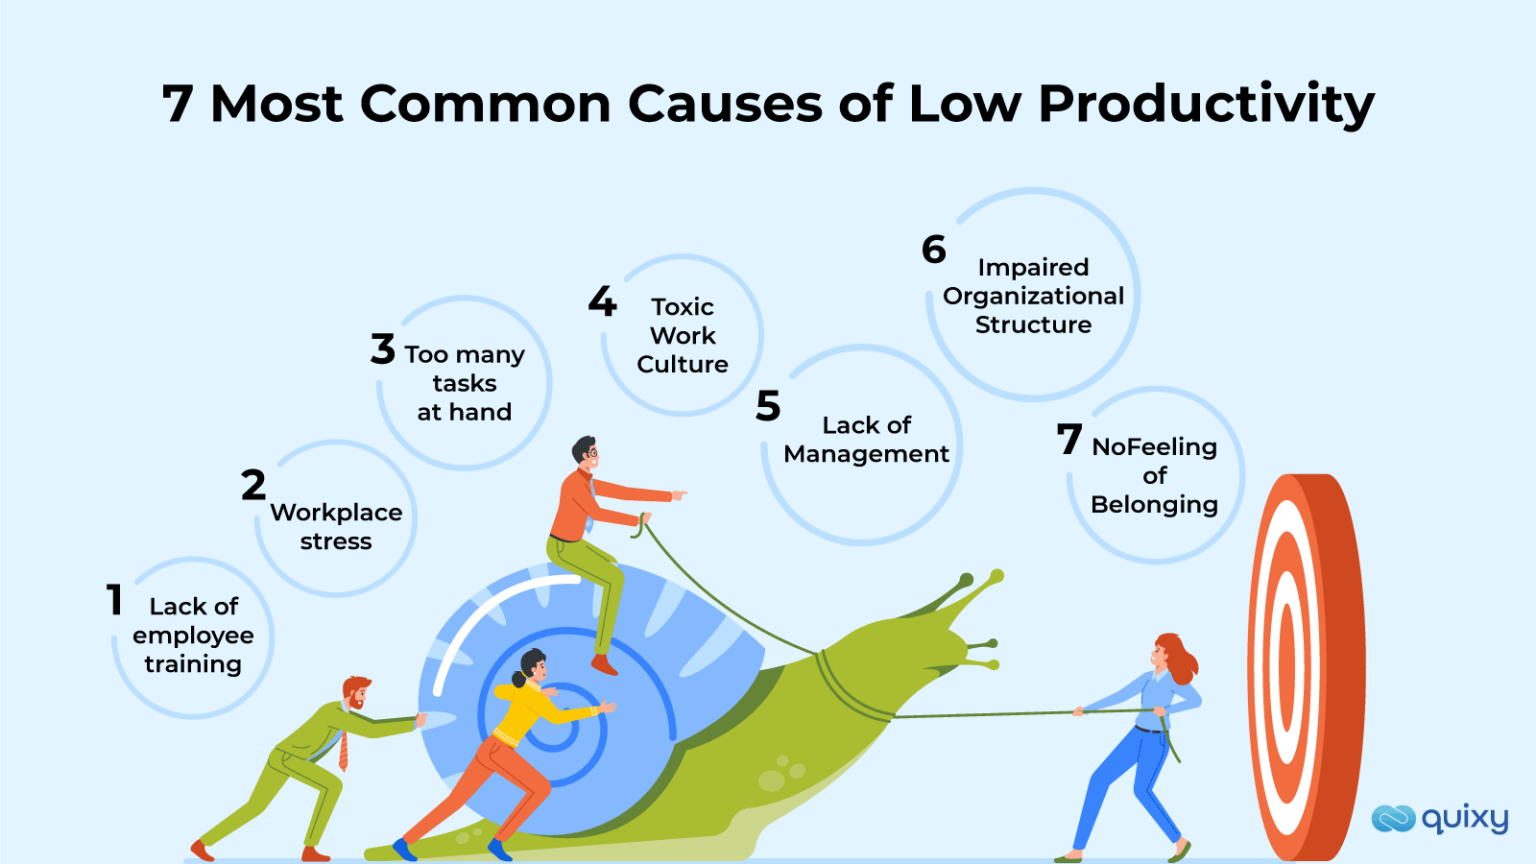  The image is an infographic that lists the seven most common causes of low productivity in the workplace. The causes are: lack of employee training, workplace stress, too many tasks at hand, toxic work culture, lack of management, impaired organizational structure, and no feeling of belonging.